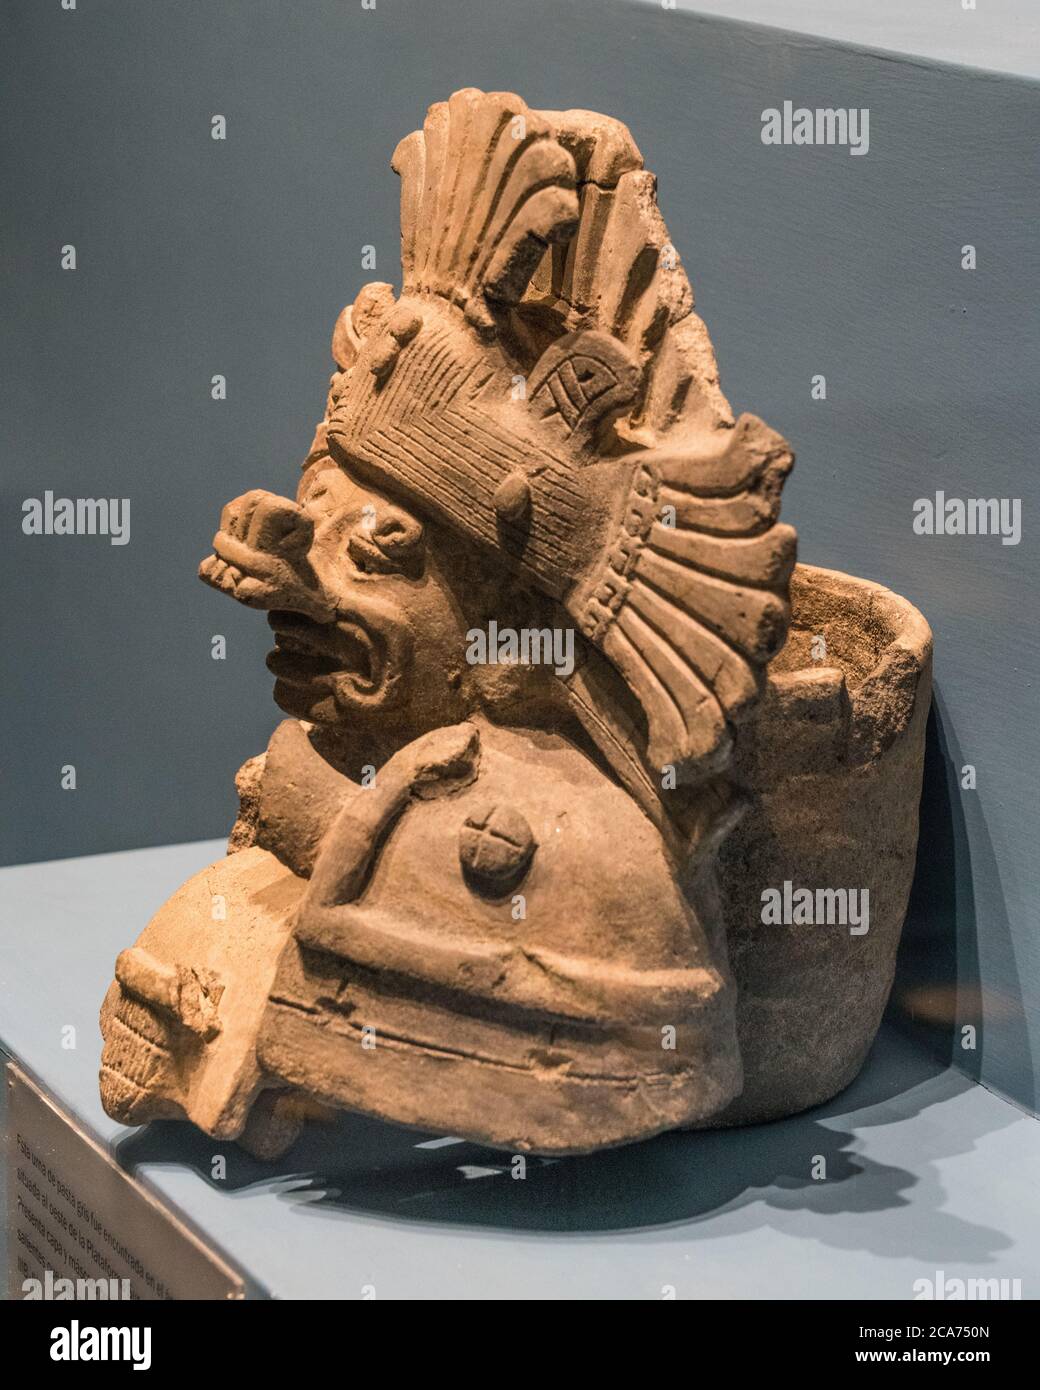 A ceramic funerary urn representing Cocijo, the Zapotec god of rain and lightning.  Monte Alban Site Museum, Oaxaca, Mexico.  A UNESCO World Heritage Stock Photo